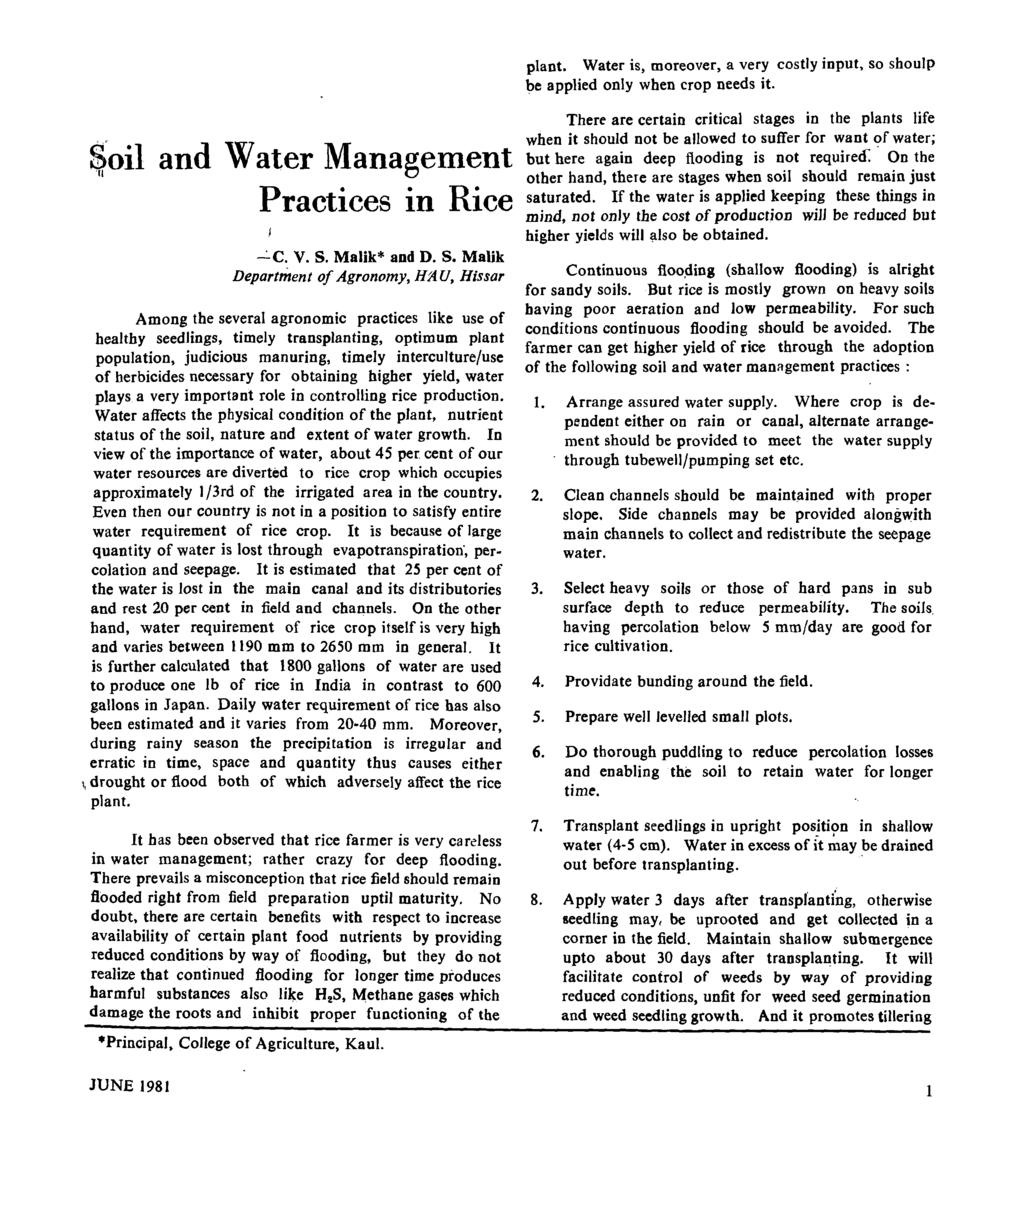 $oil and Water Management Practices in Rice I...:.c. V. S.